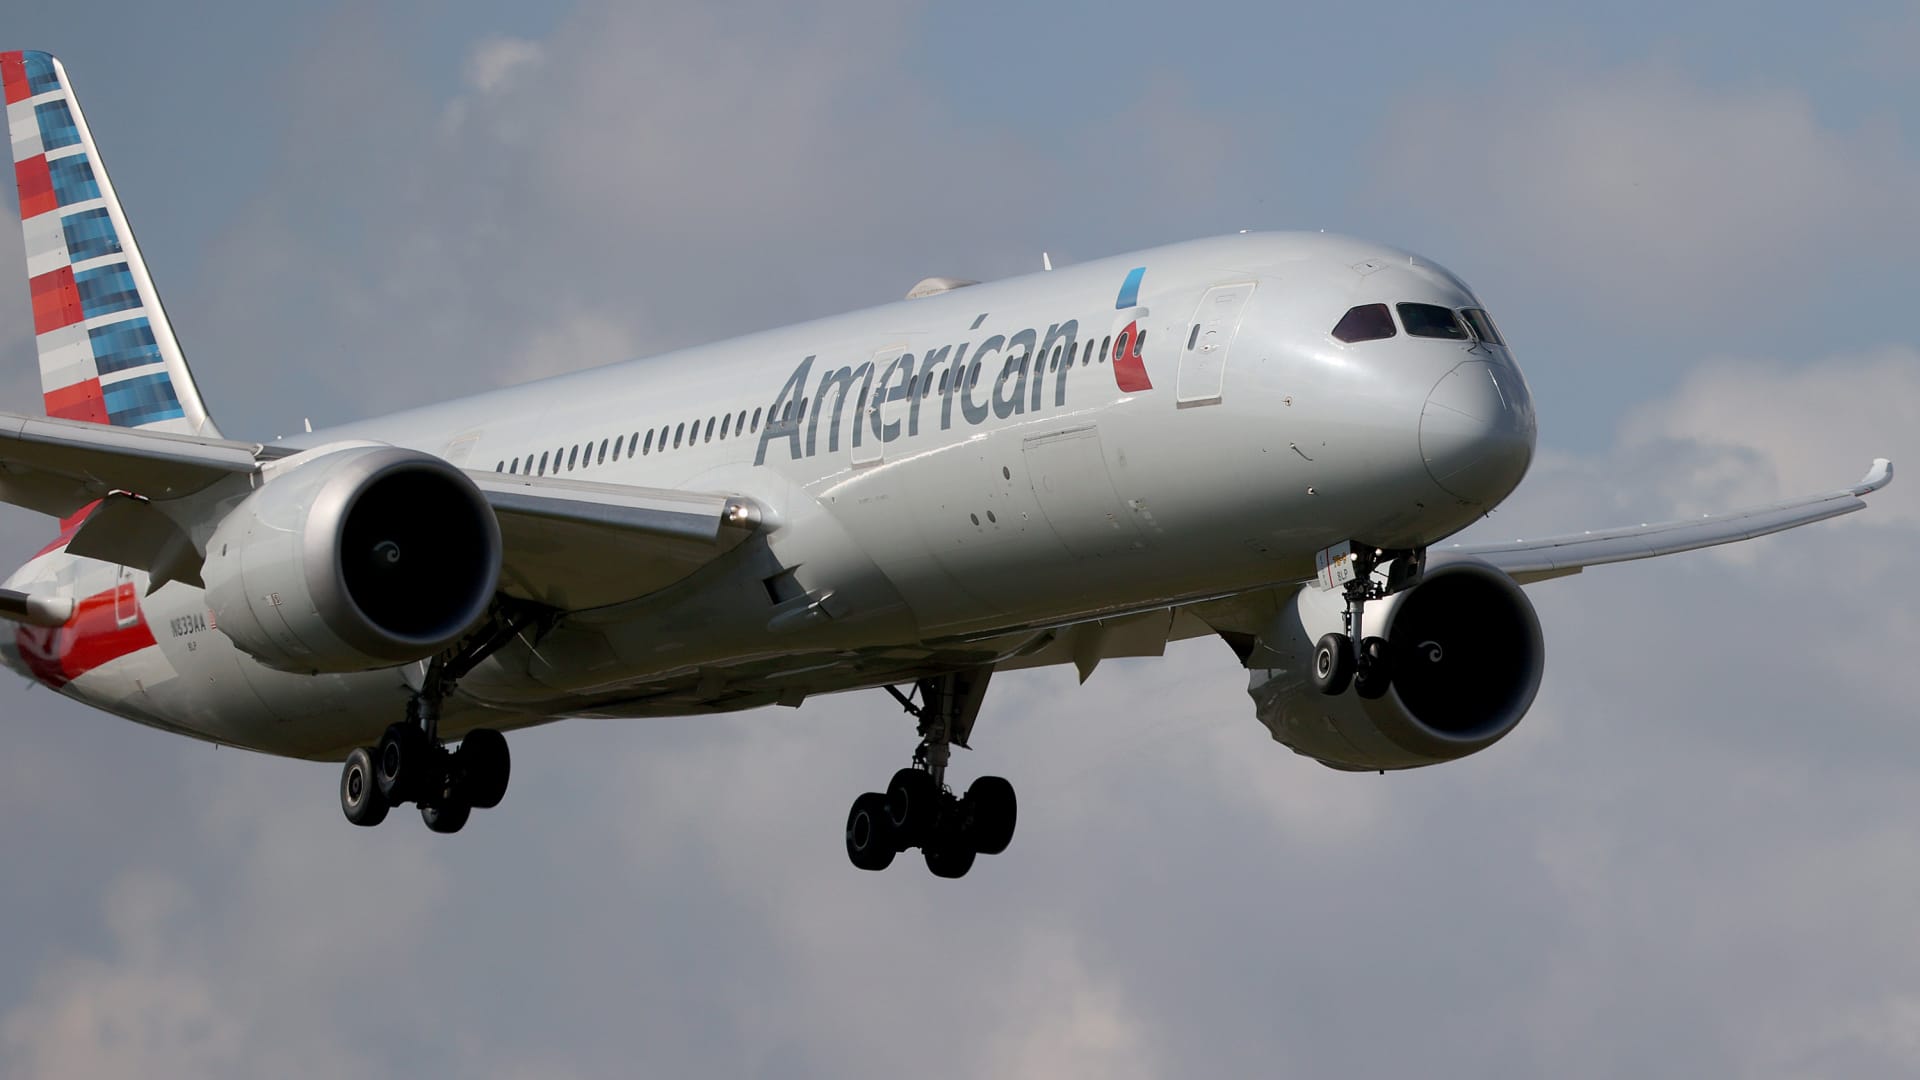 American Airlines pilots get triple pay for trips dropped in scheduling glitch